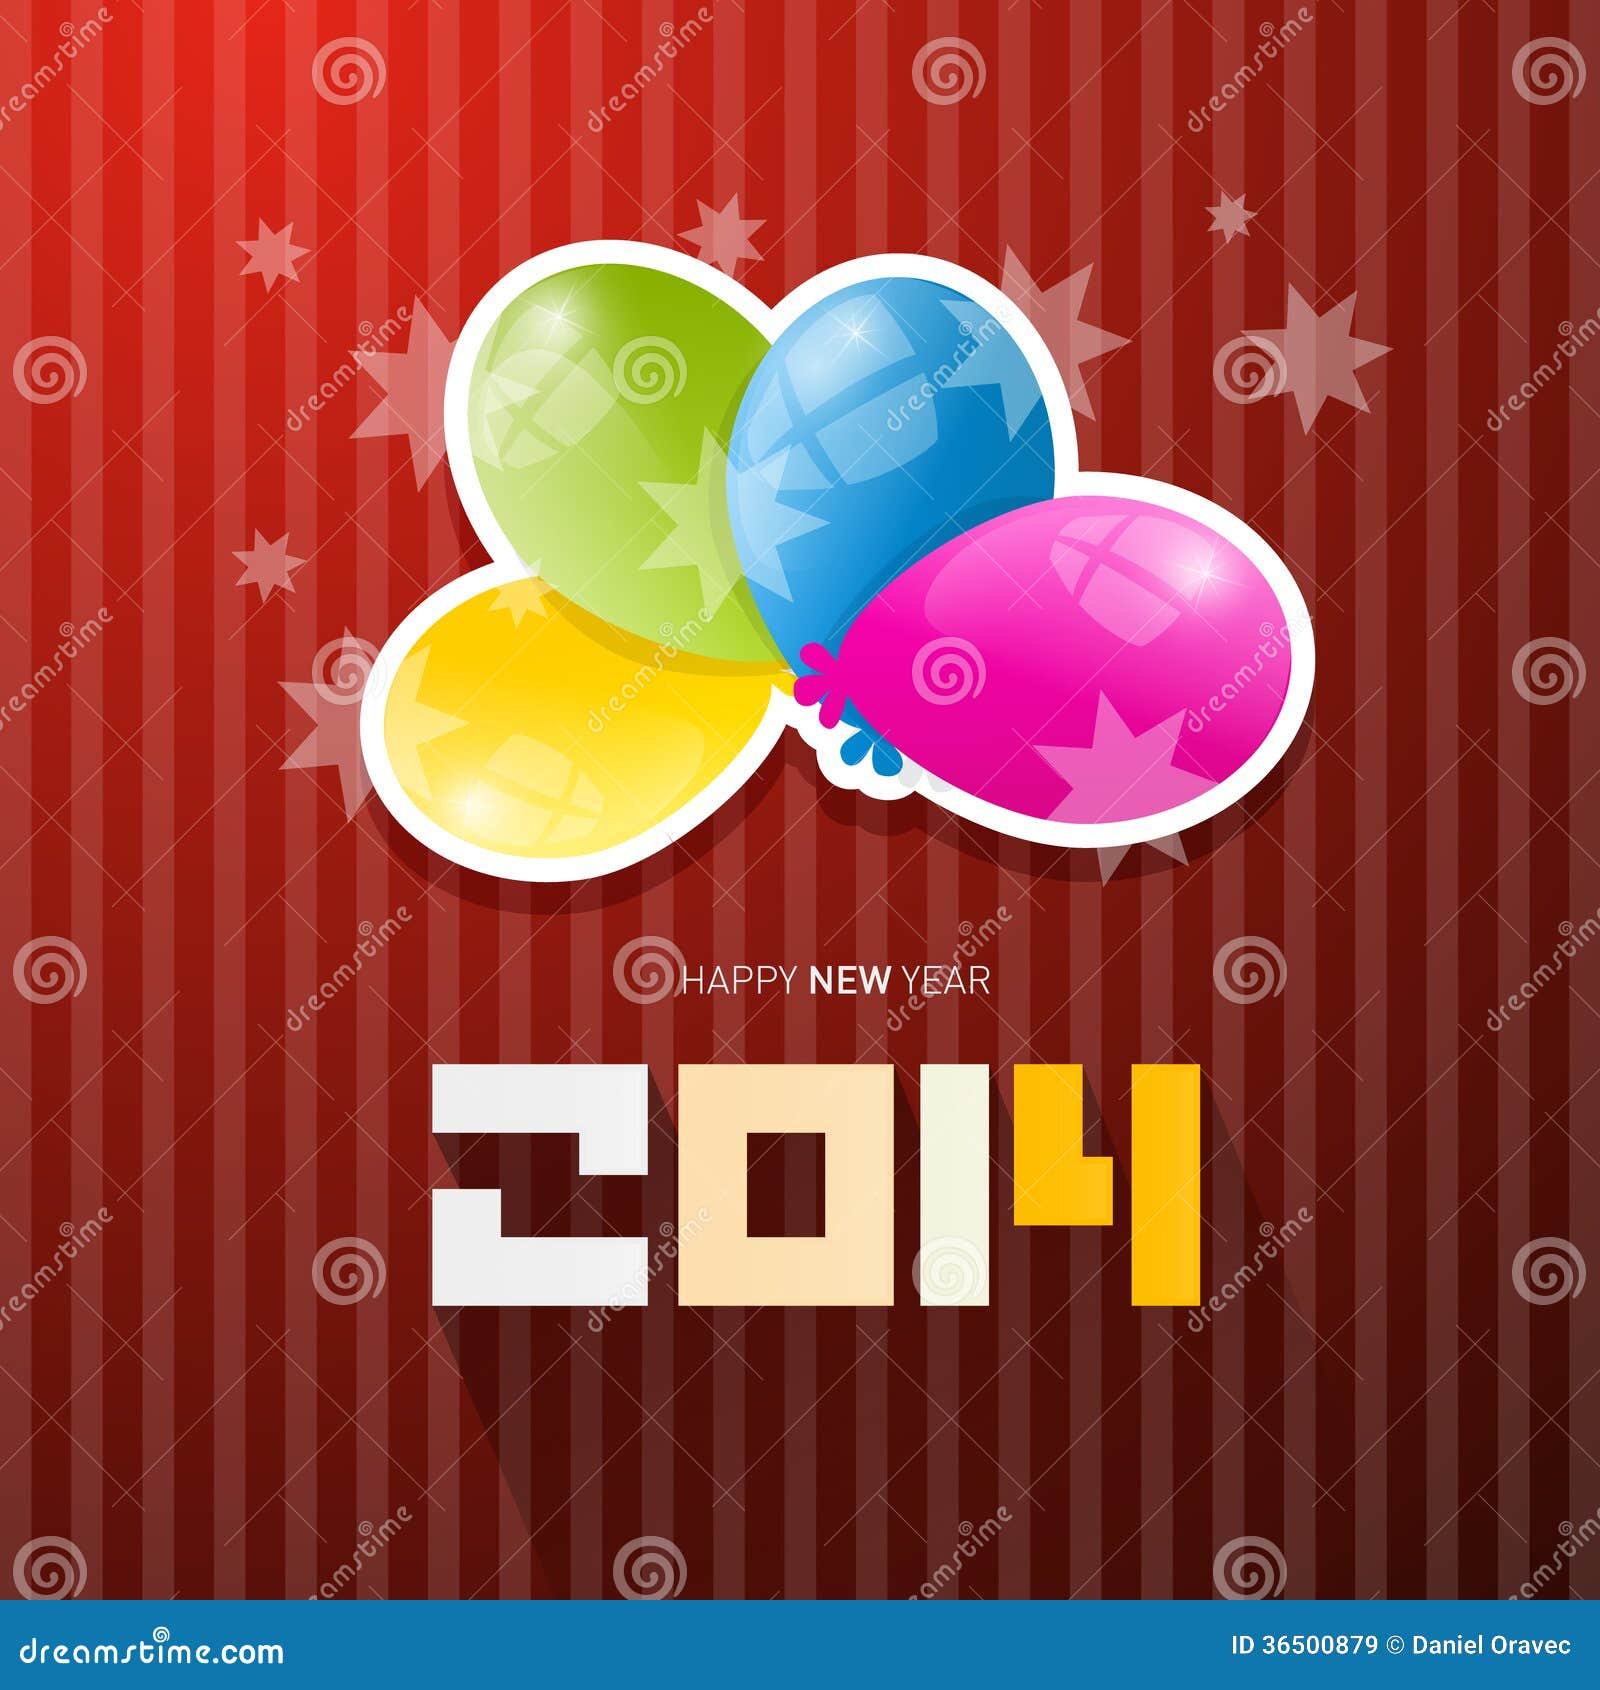 Happy New Year 2014 Title stock vector. Illustration of design - 36500879